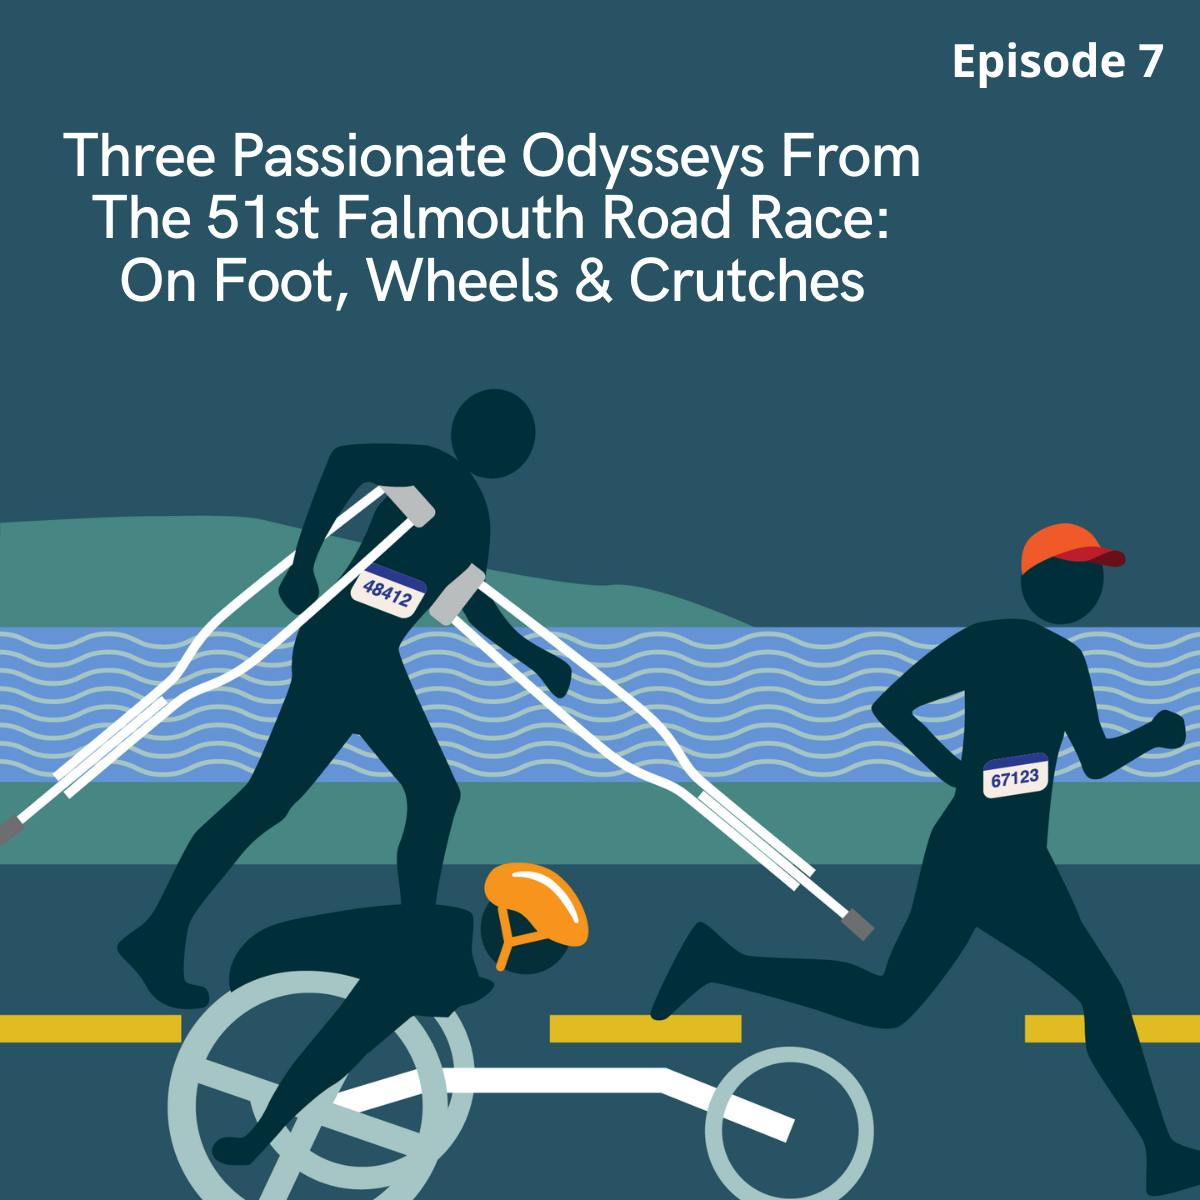 Three Passionate Odysseys from the 51st Falmouth Road Race: On Foot, Wheels & Crutches